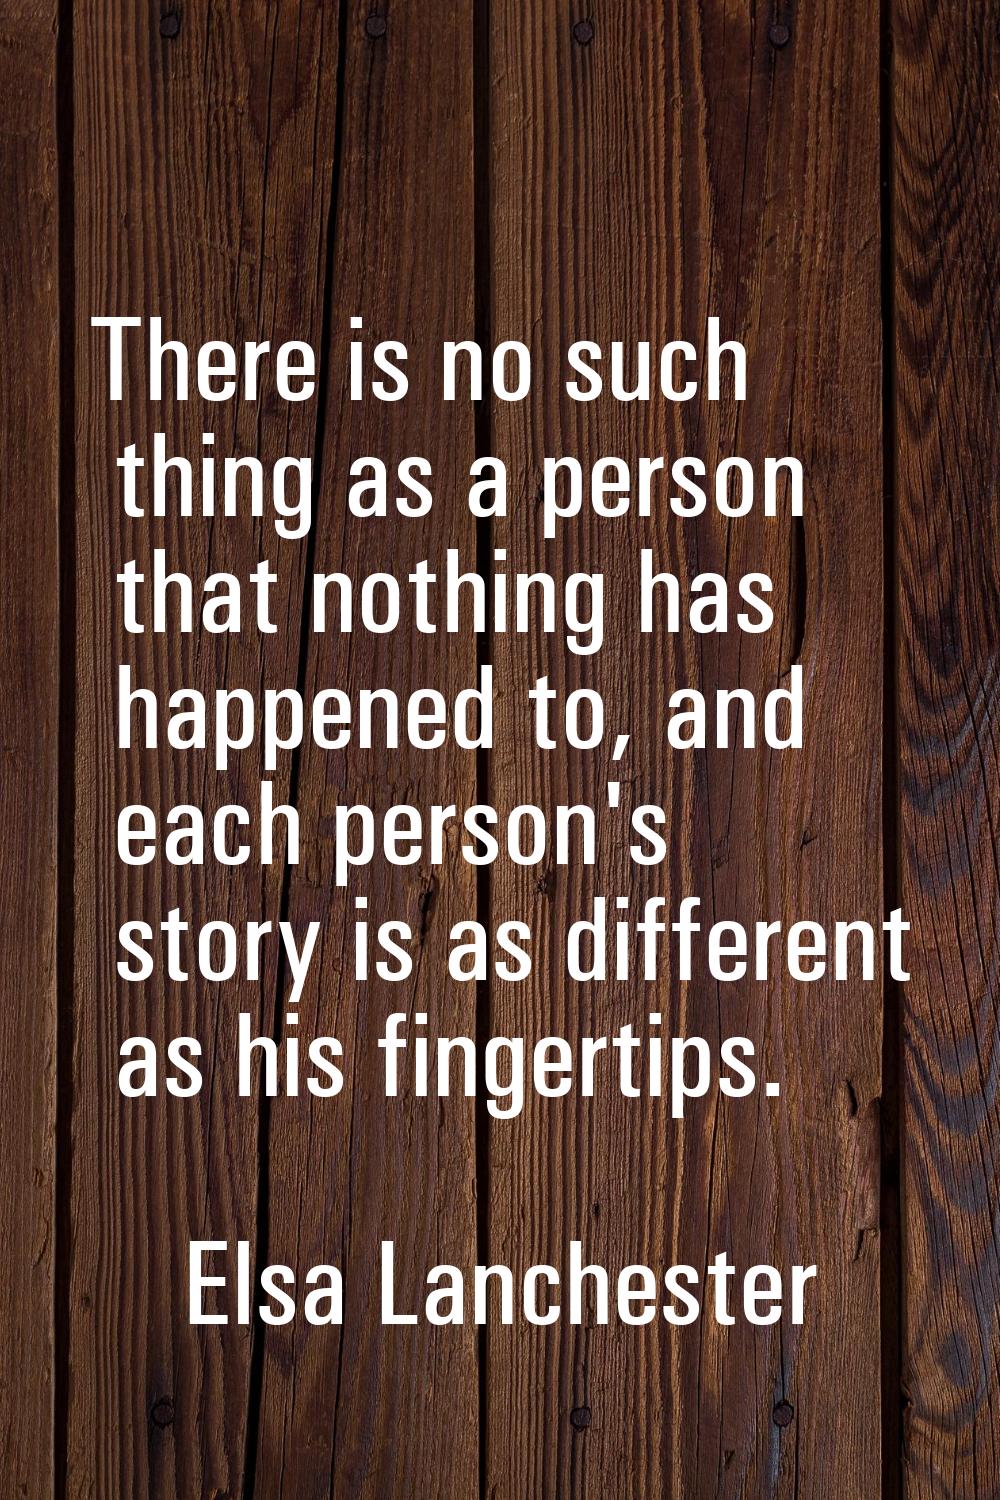 There is no such thing as a person that nothing has happened to, and each person's story is as diff